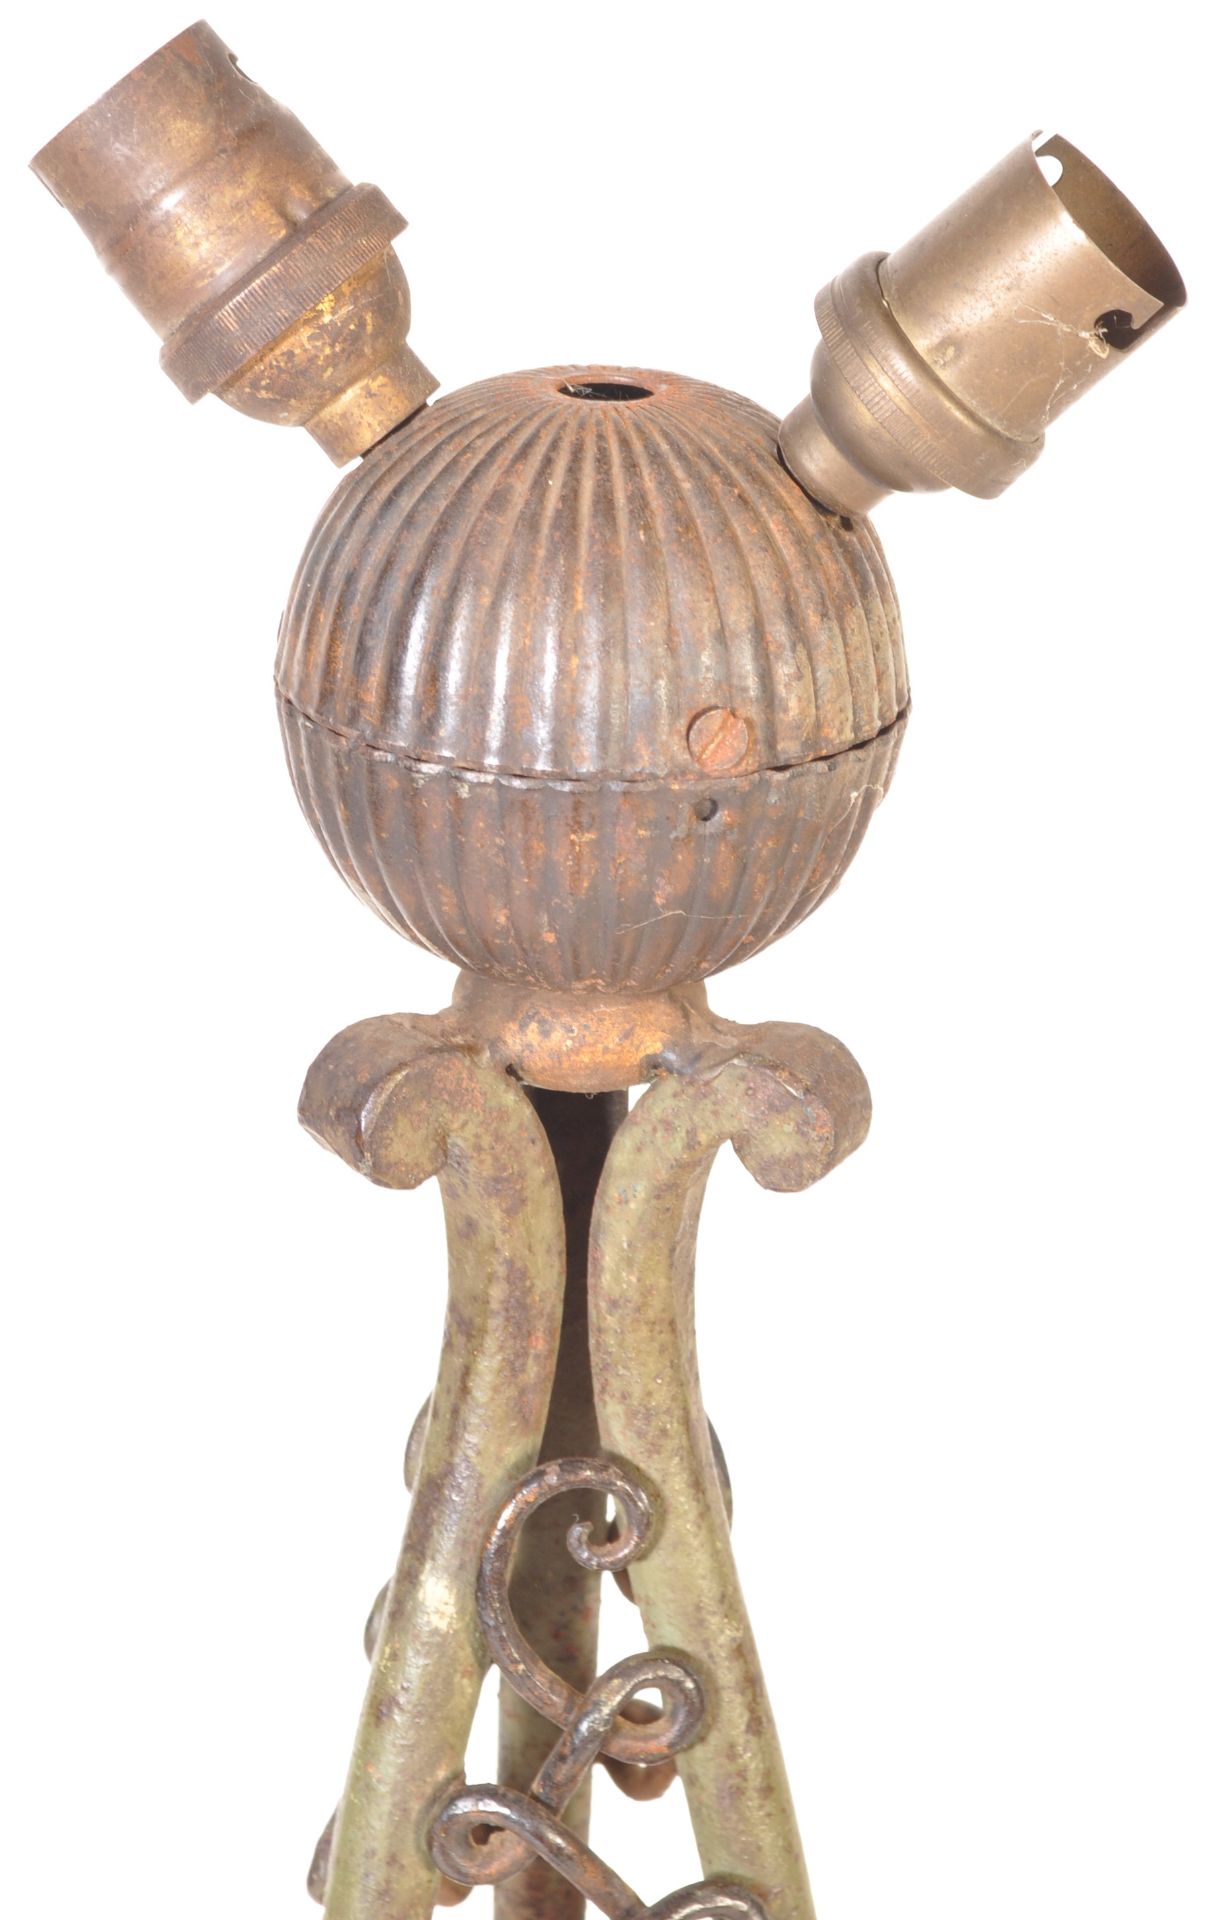 EARLY 20TH CENTURY CAST METAL FLOOR STANDING LAMP - Image 2 of 5